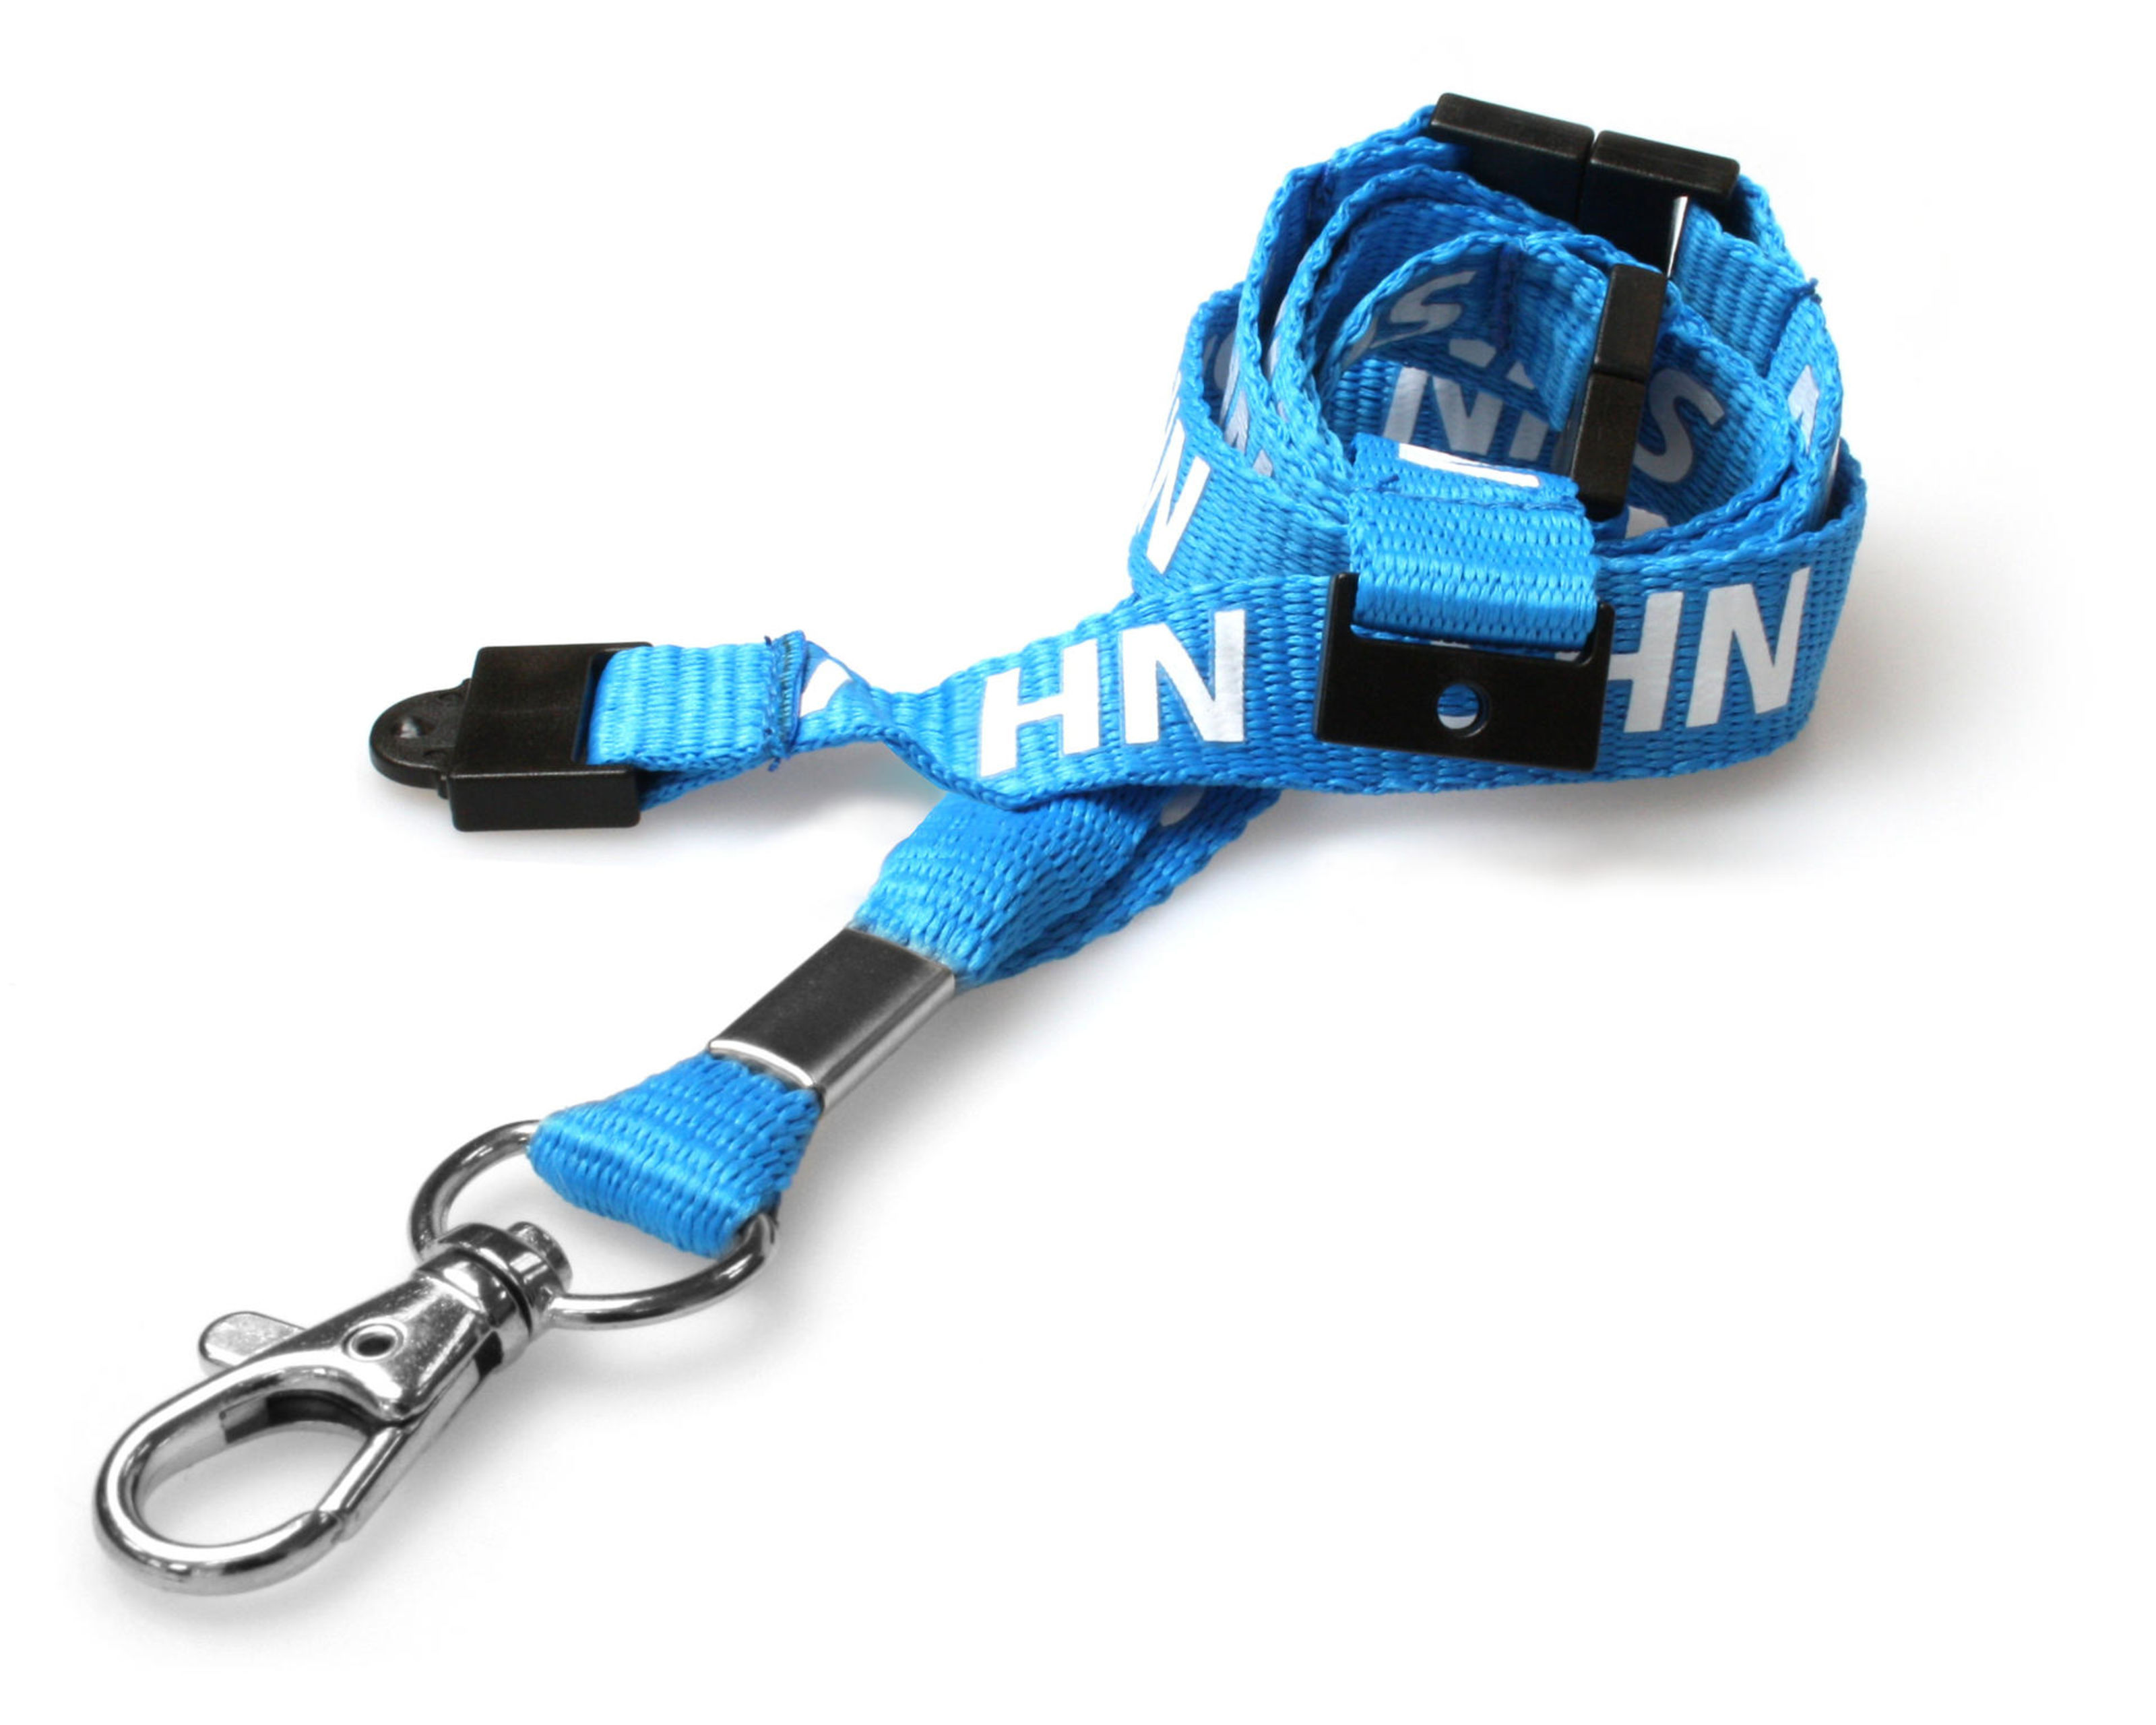 NHS Staff Lanyards with Double Breakaway and Metal Trigger Clip